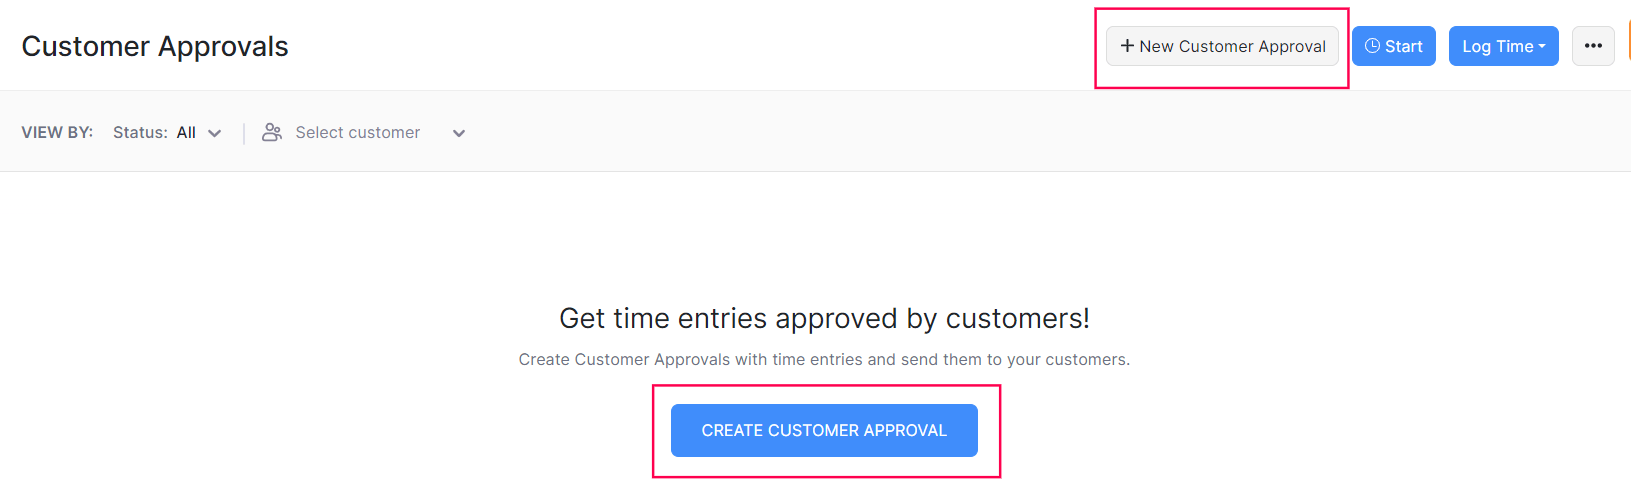 Create Customer Approval